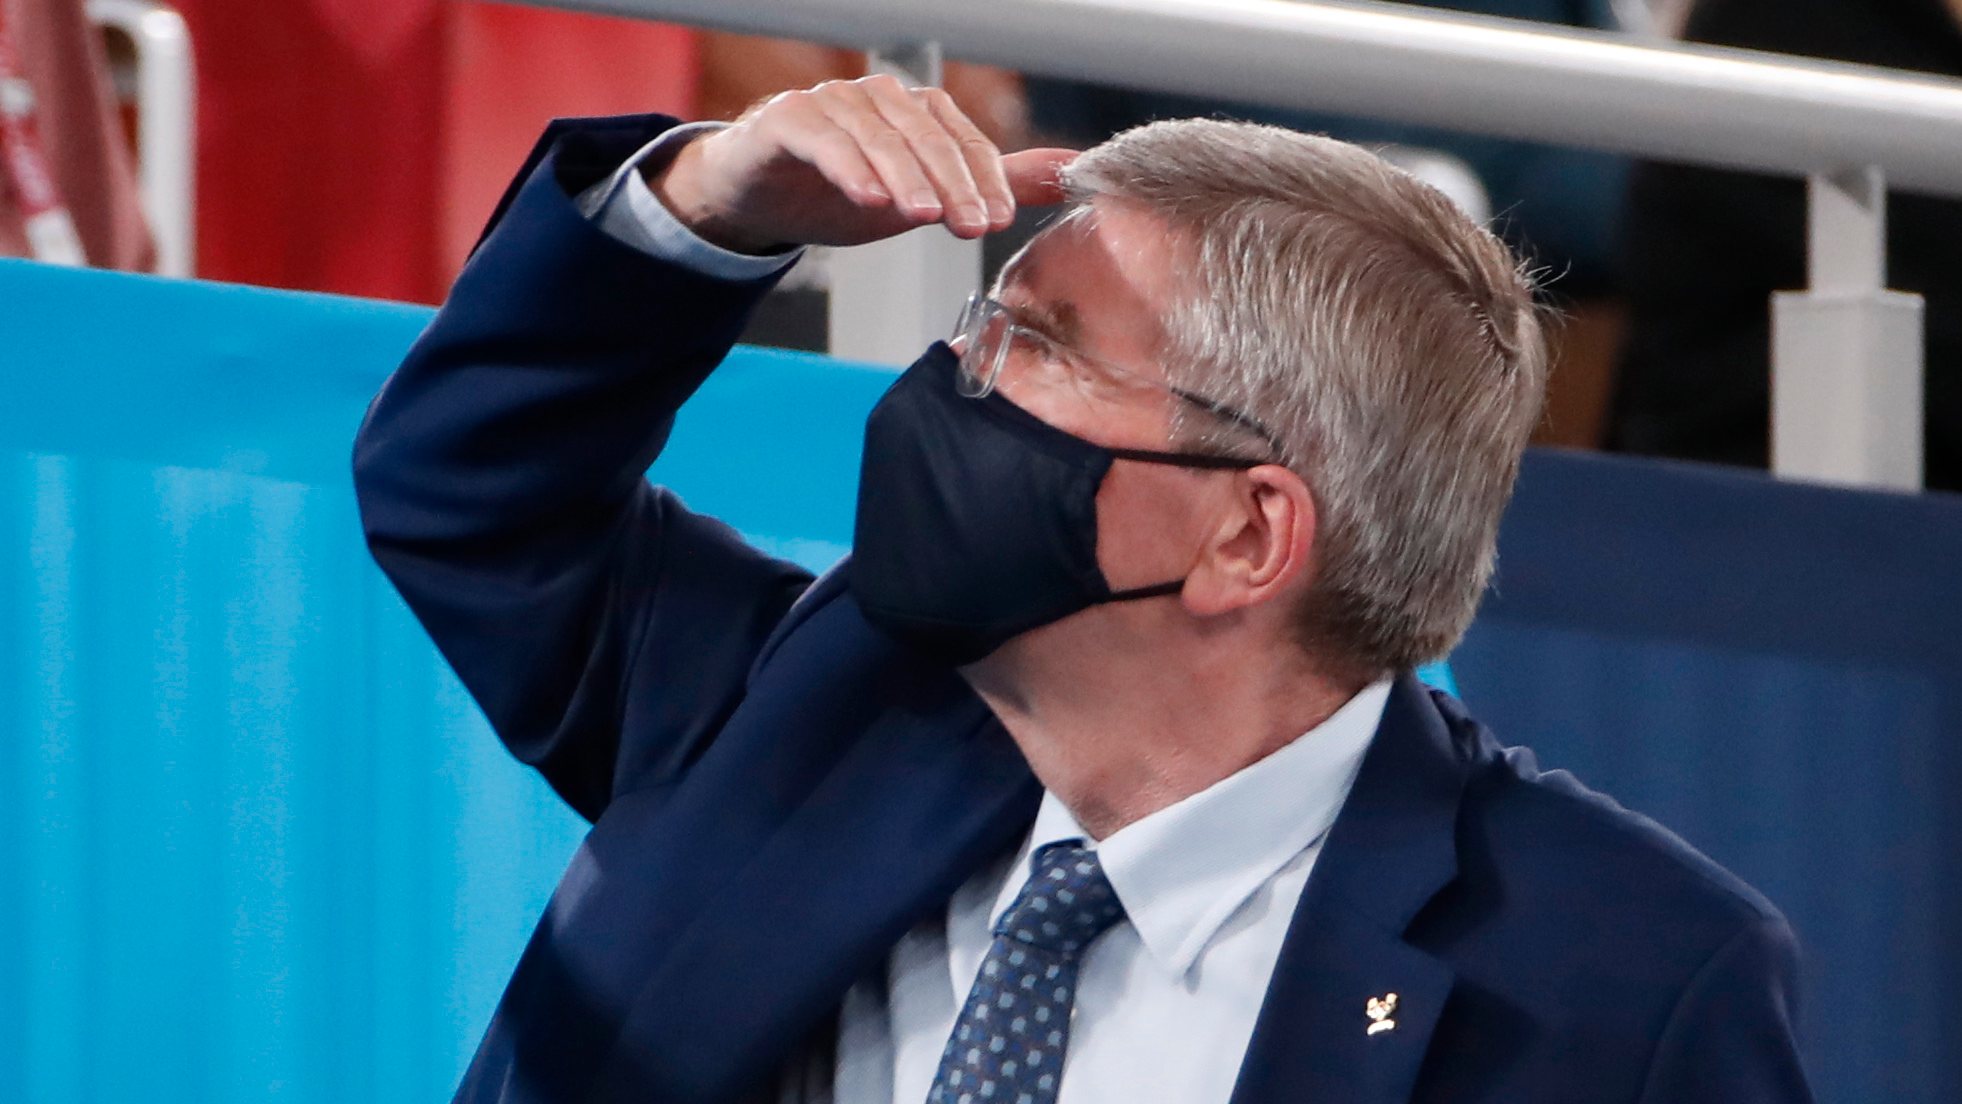 epa09370541 The president of the International Olympic Committee Thomas Bach reacts during the Artistic Gymnastics Women Final of the Tokyo 2020 Olympic Games at the Ariake Gymnas?tics Centre in Tokyo, Japan, 27 July 2021.  EPA/TATYANA ZENKOVICH